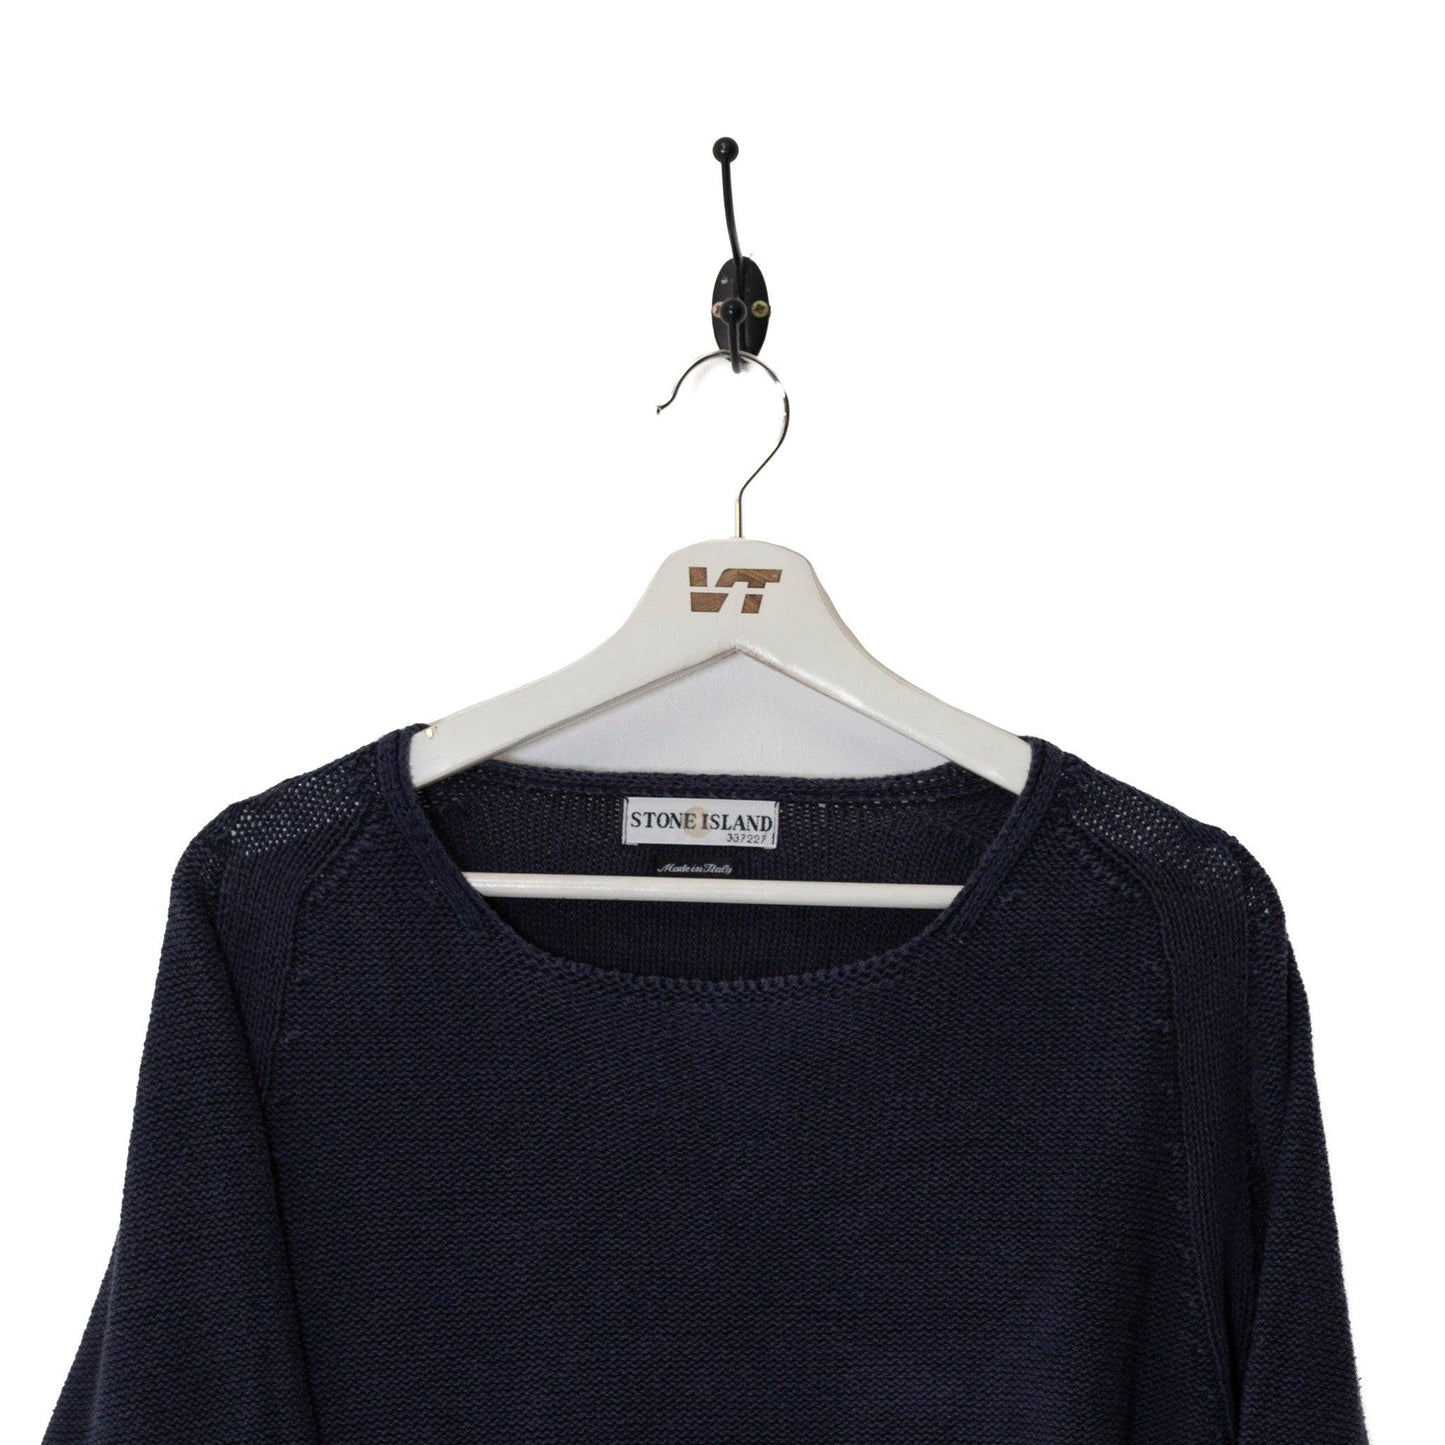 S/S 2002 Stone Island Navy Ribbed Sweater - Known Source